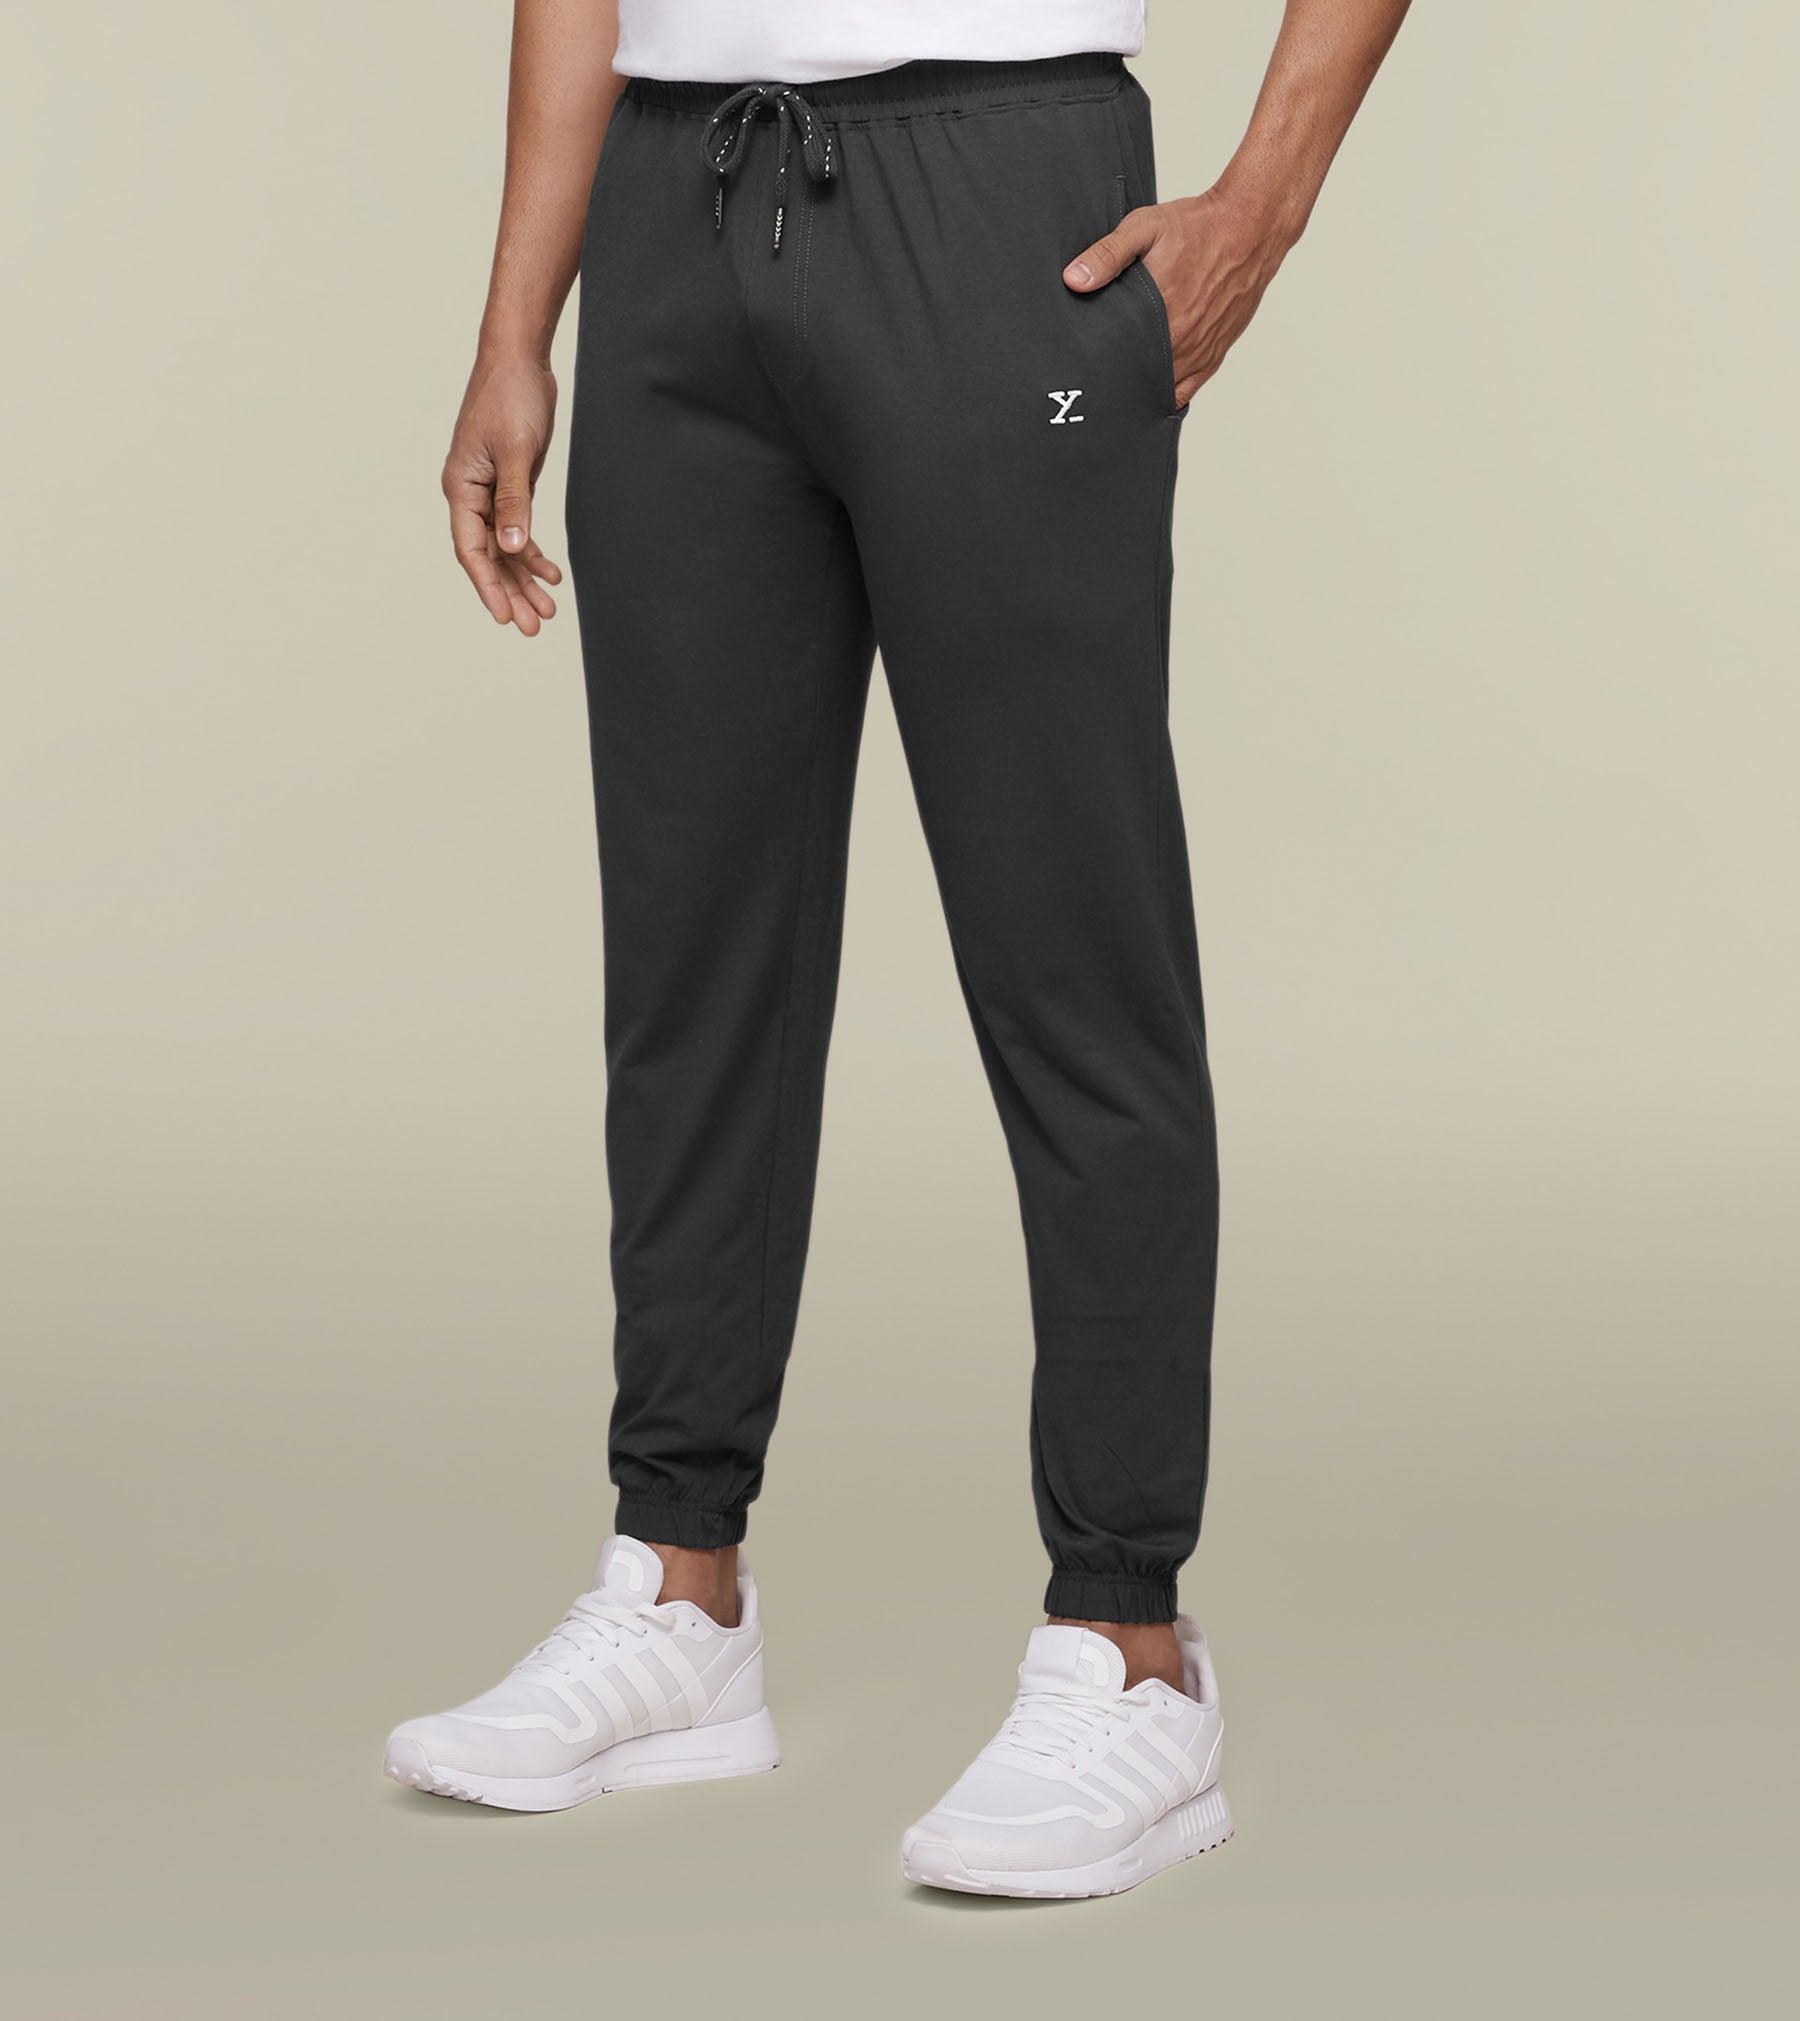 Joggers for Men - Buy Stylish Joggers Track Pants Online in India